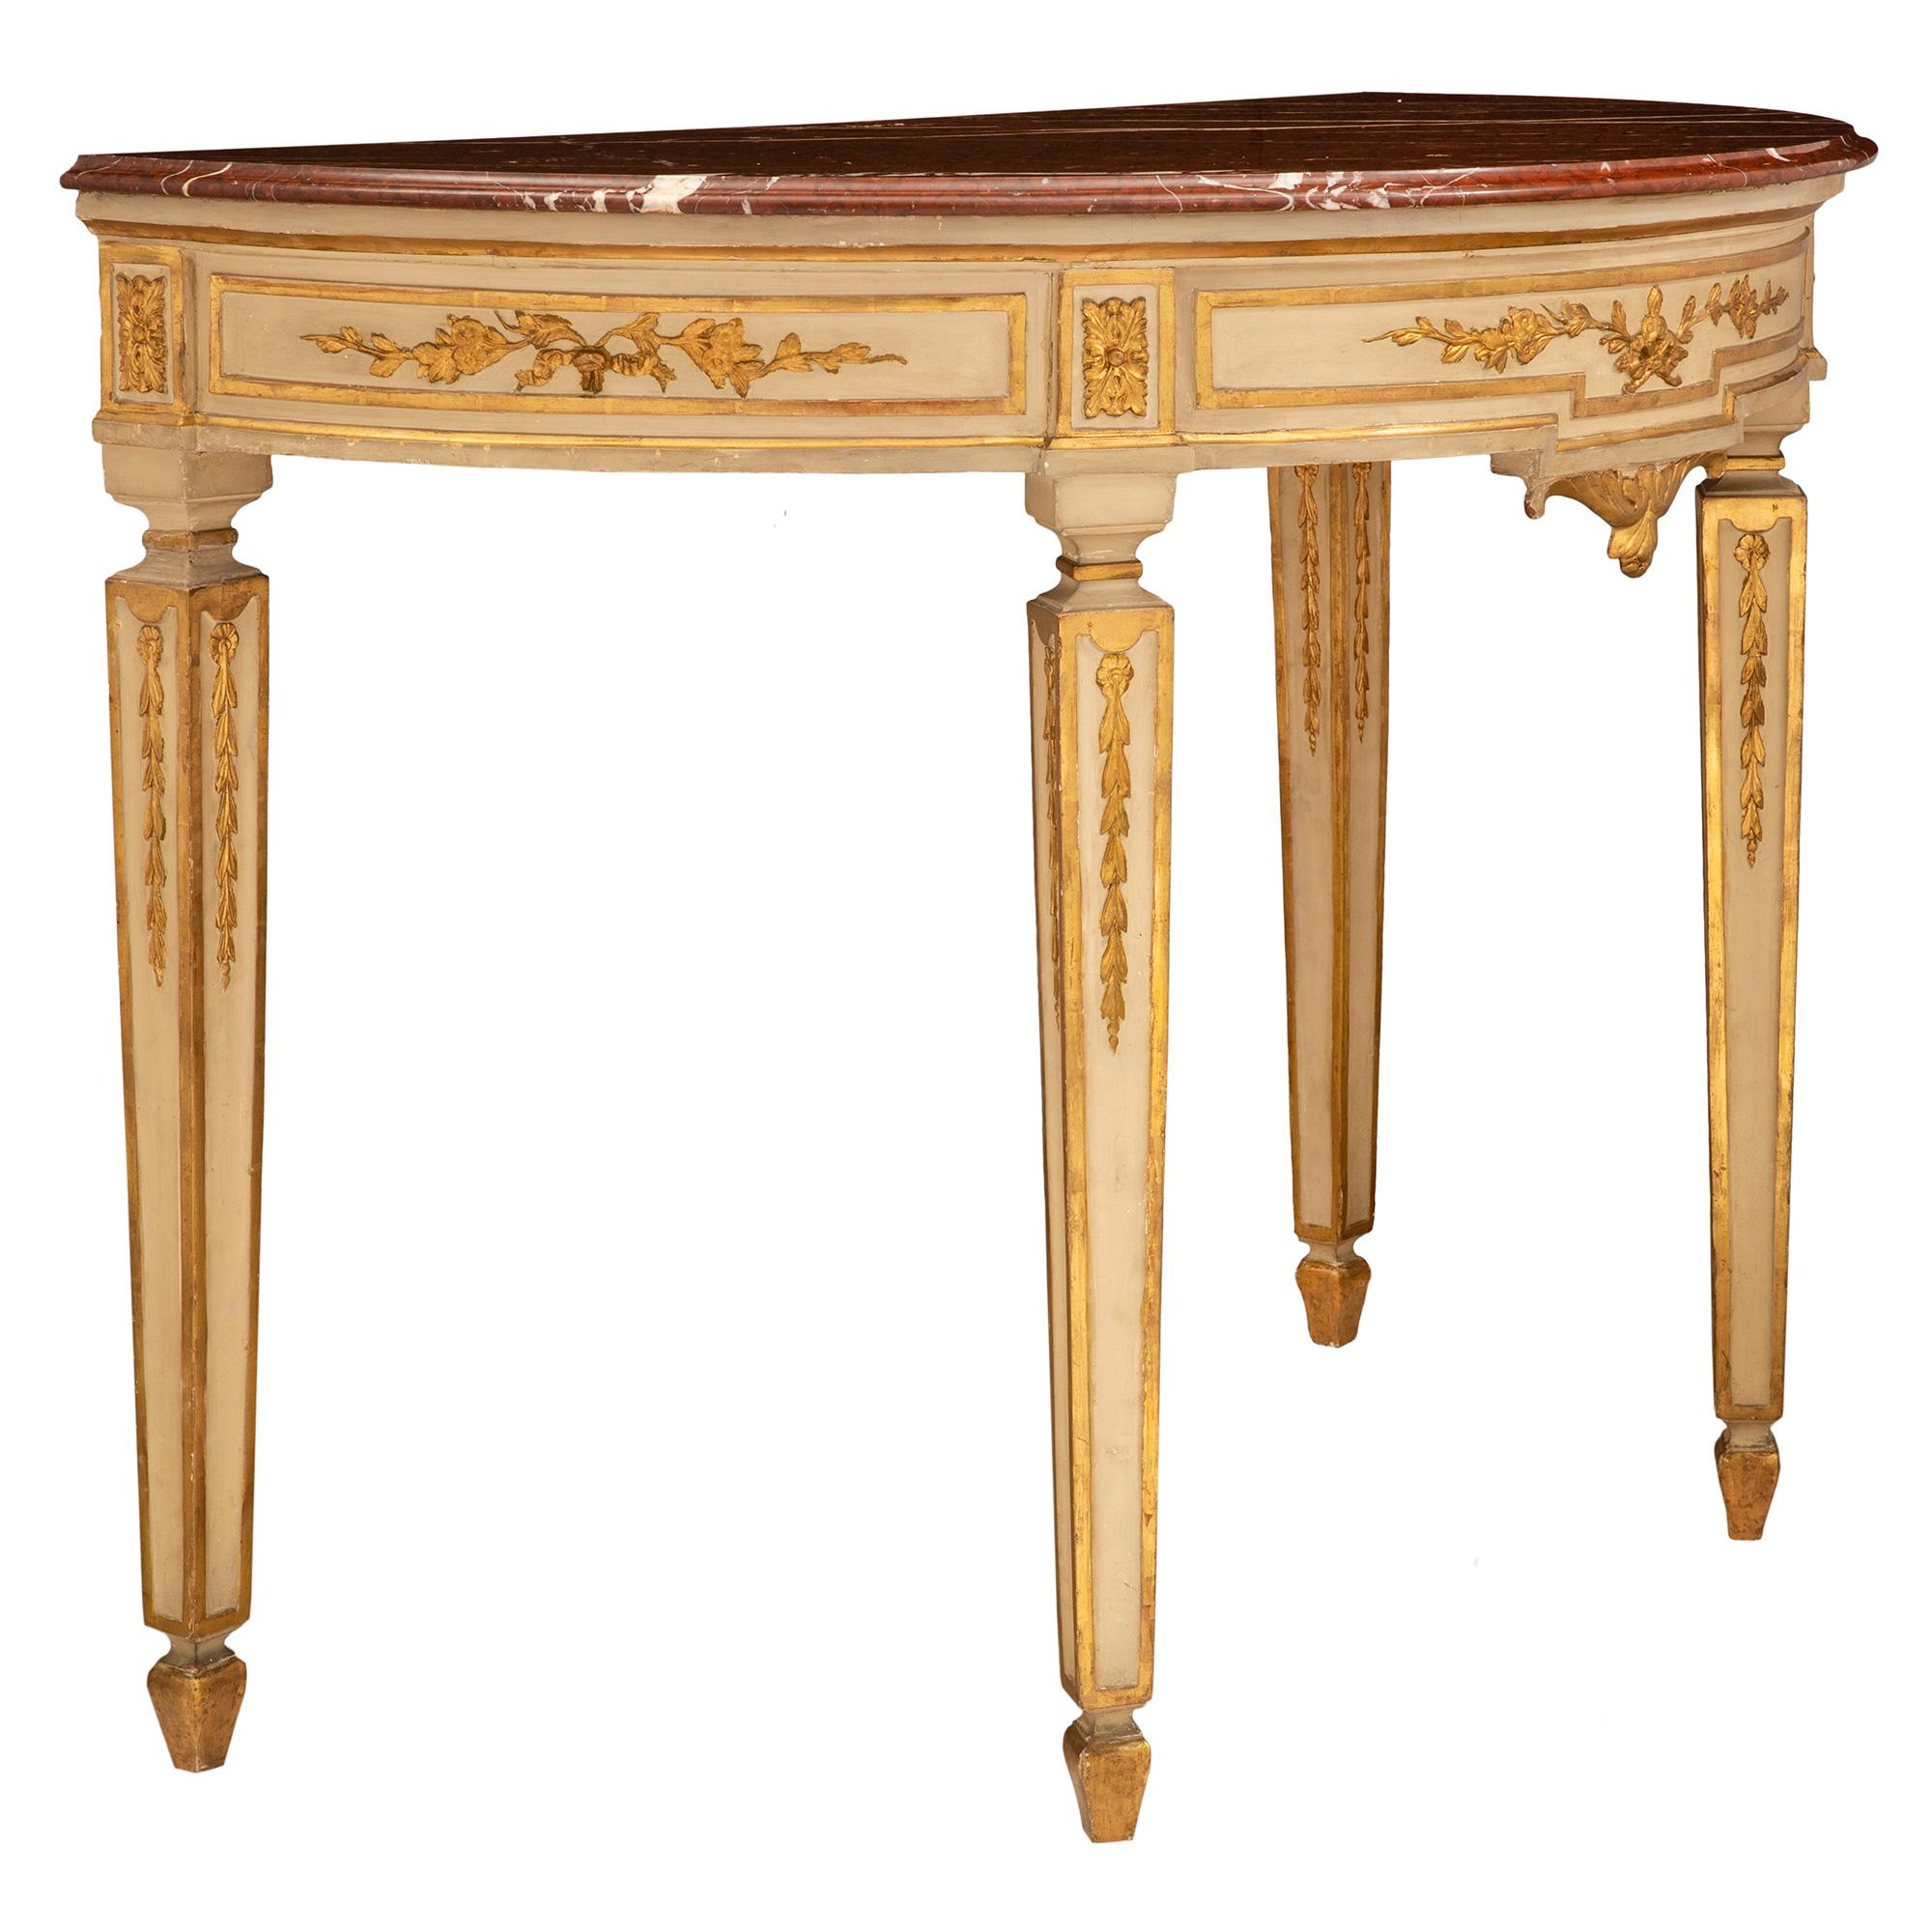 Patinated Italian 19th Century Louis XVI Style Freestanding Console For Sale